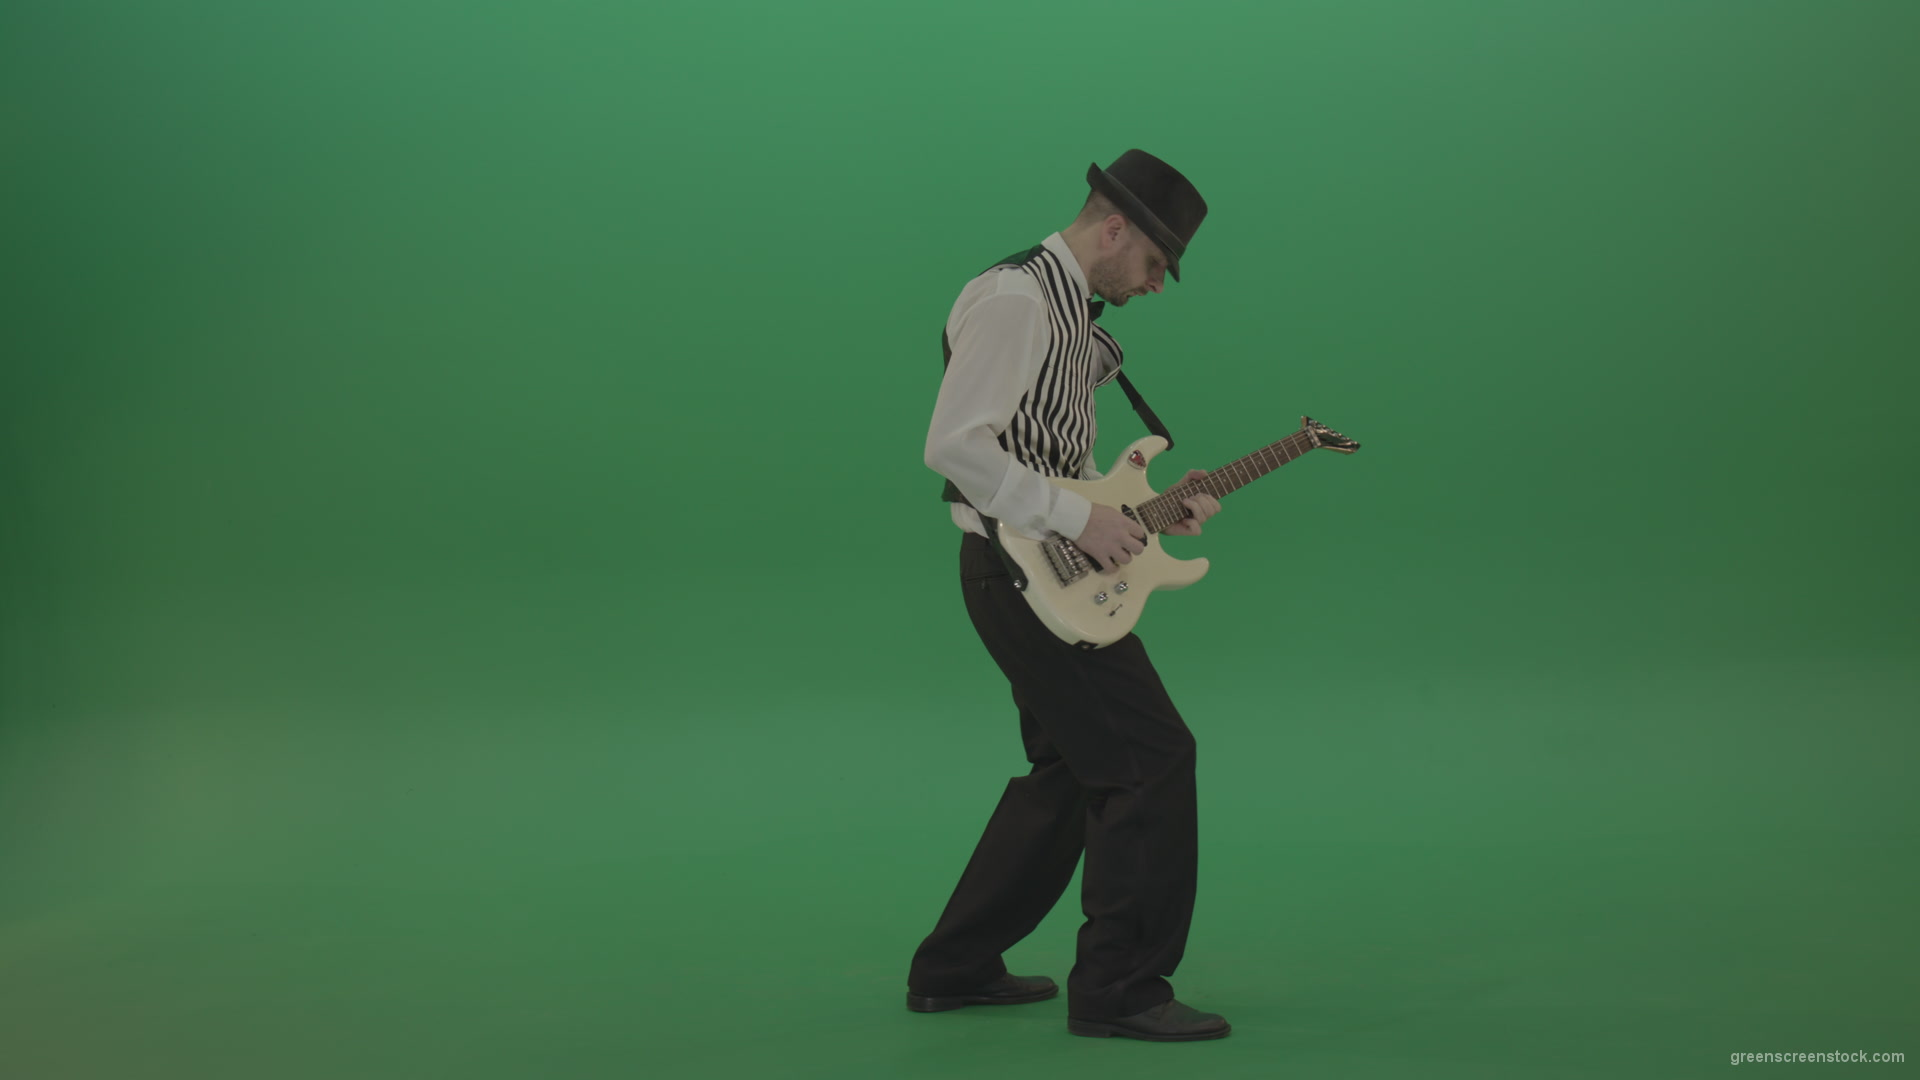 Jazz-man-musician-play-guitar-solo-music-in-guitar-on-green-screen-isolated-in-side-view_002 Green Screen Stock